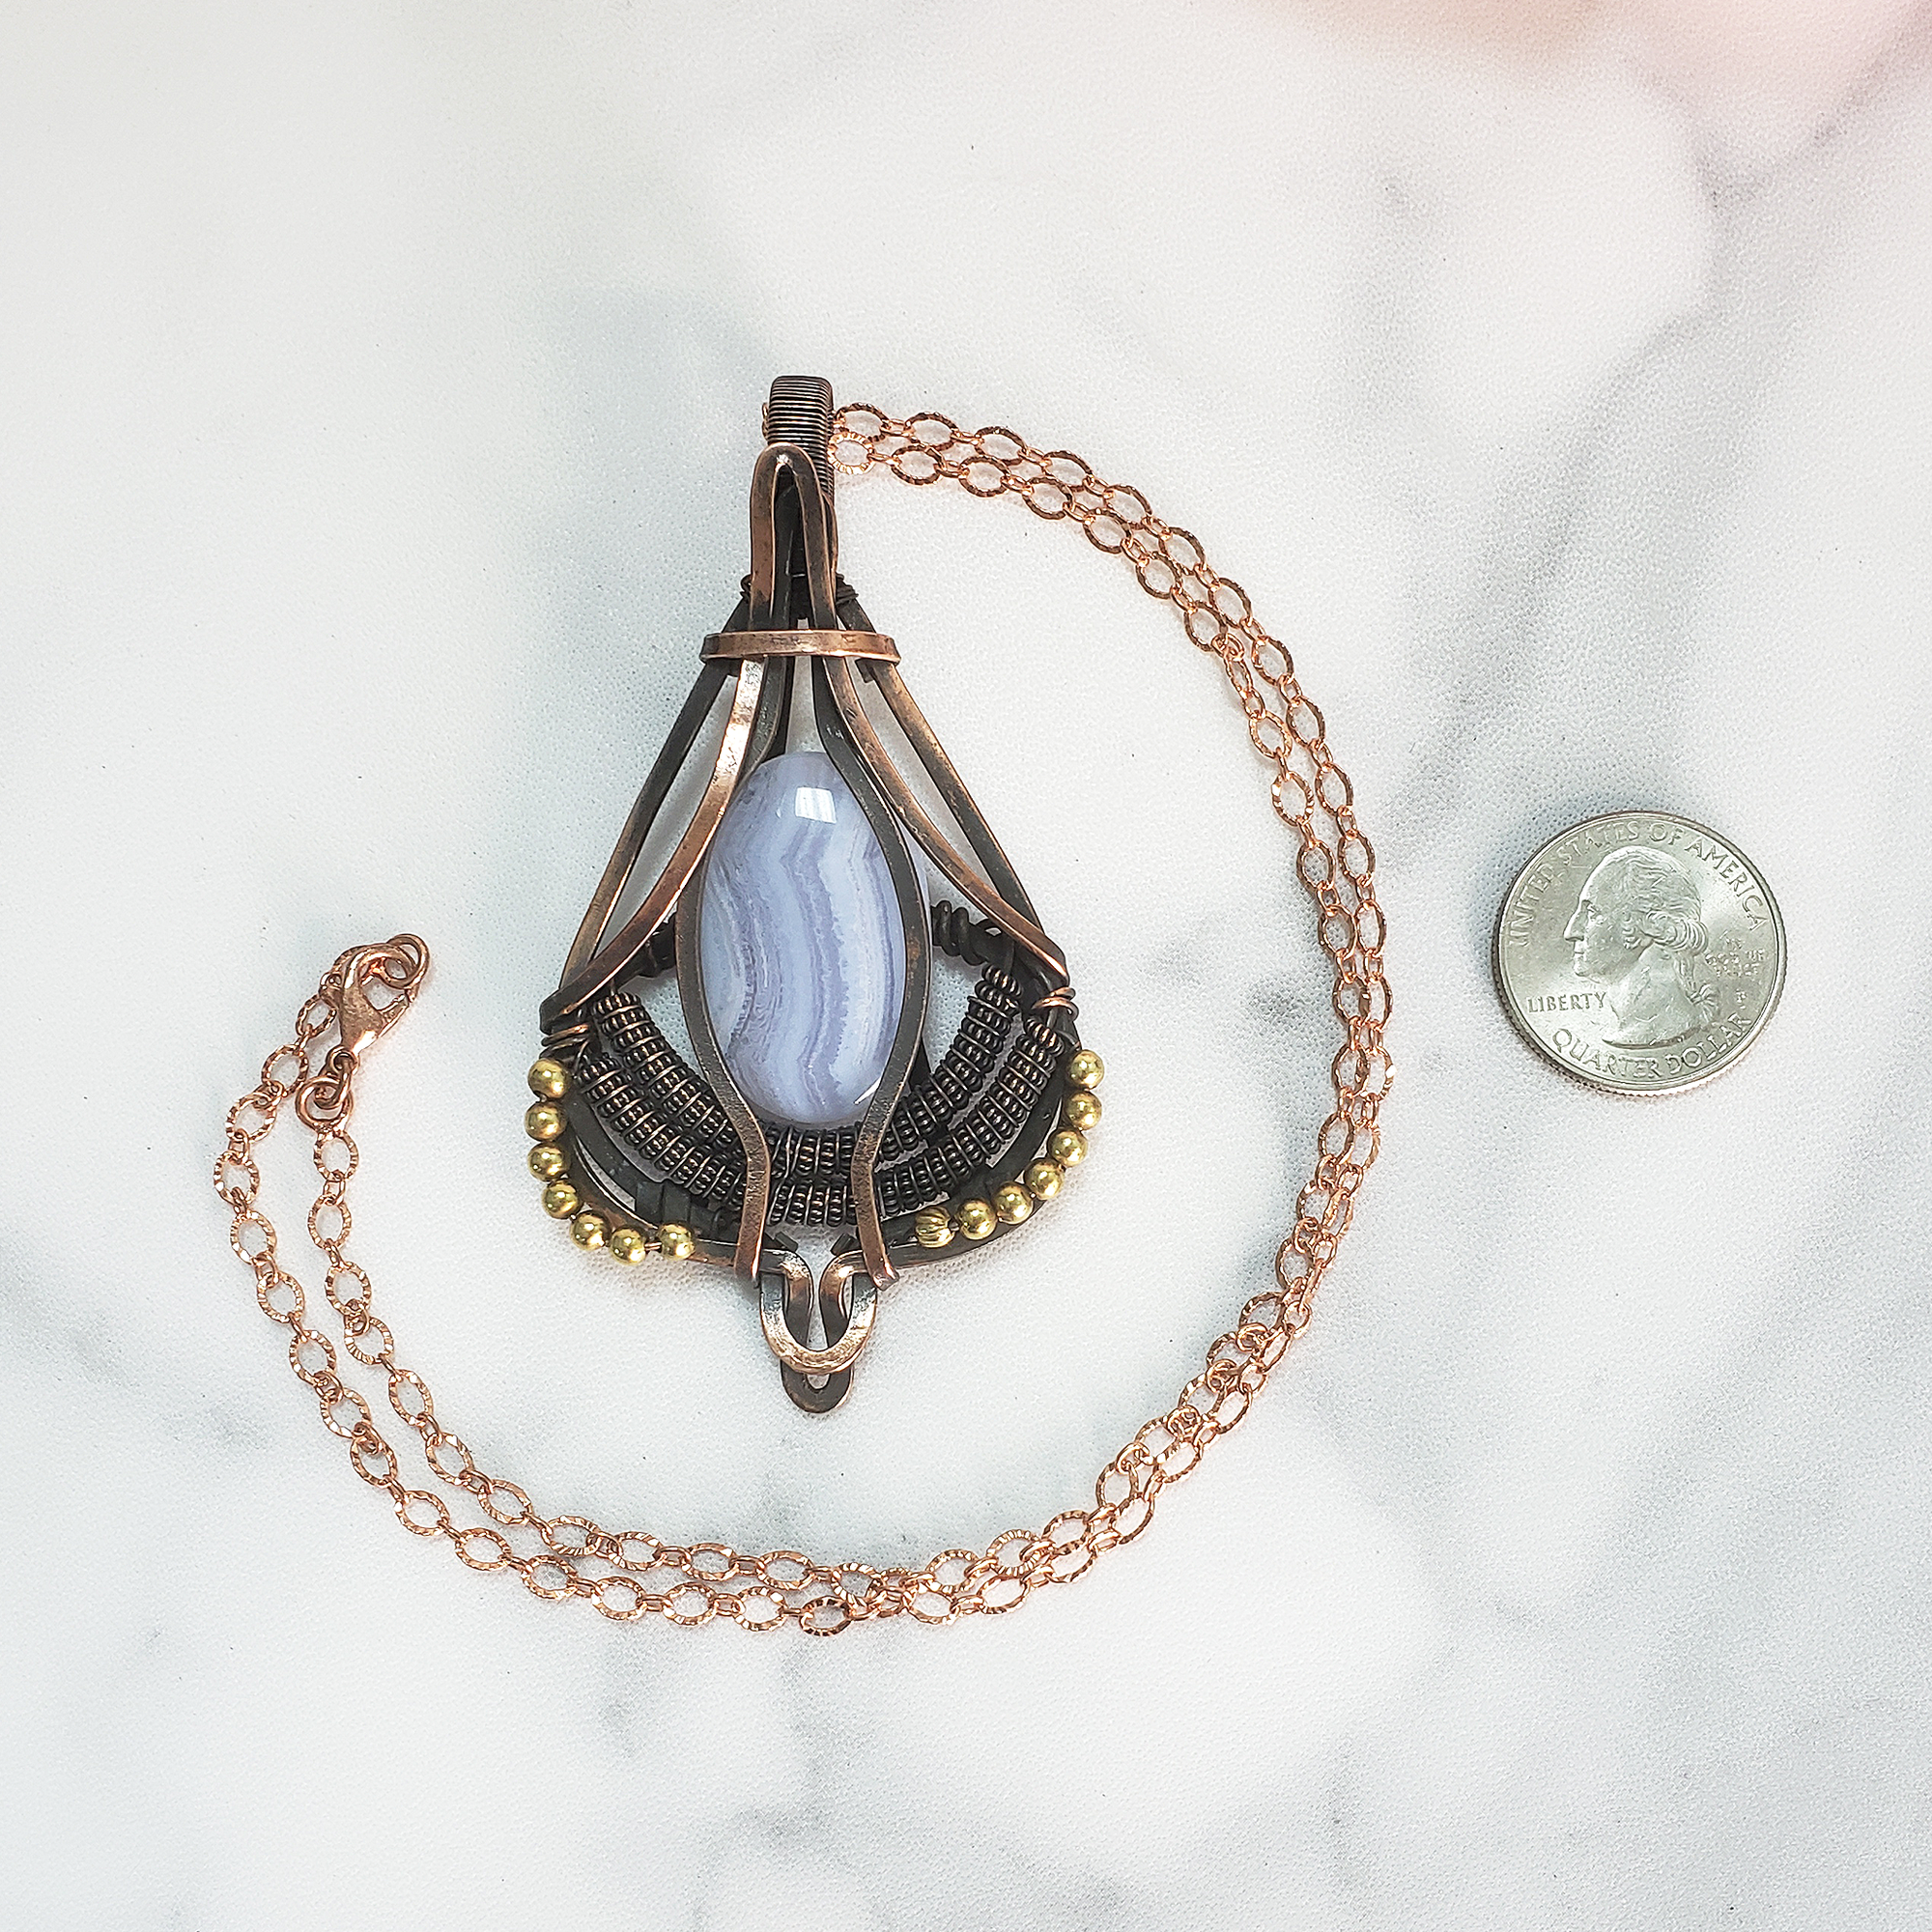 Blue Lace Agate Wire Wrapped Copper Pendant Natural Crystal Necklace with Chain - Bizet - Size Comparison